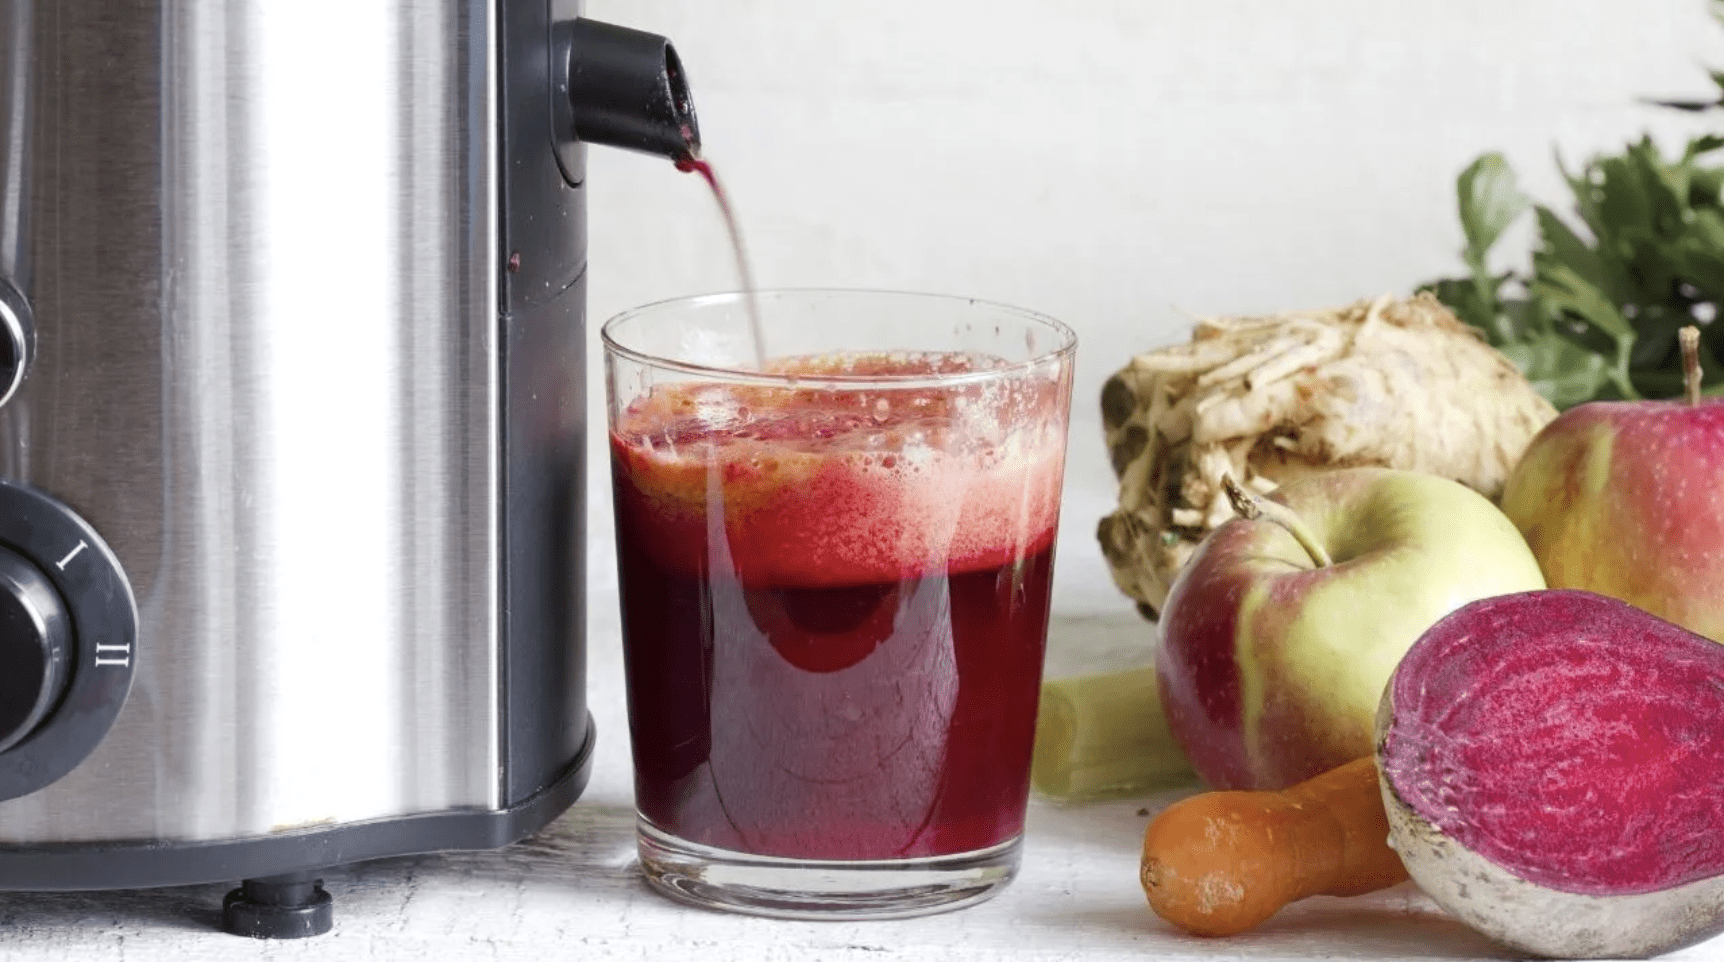 Most Common Mistakes That Can Damage Your Juicer